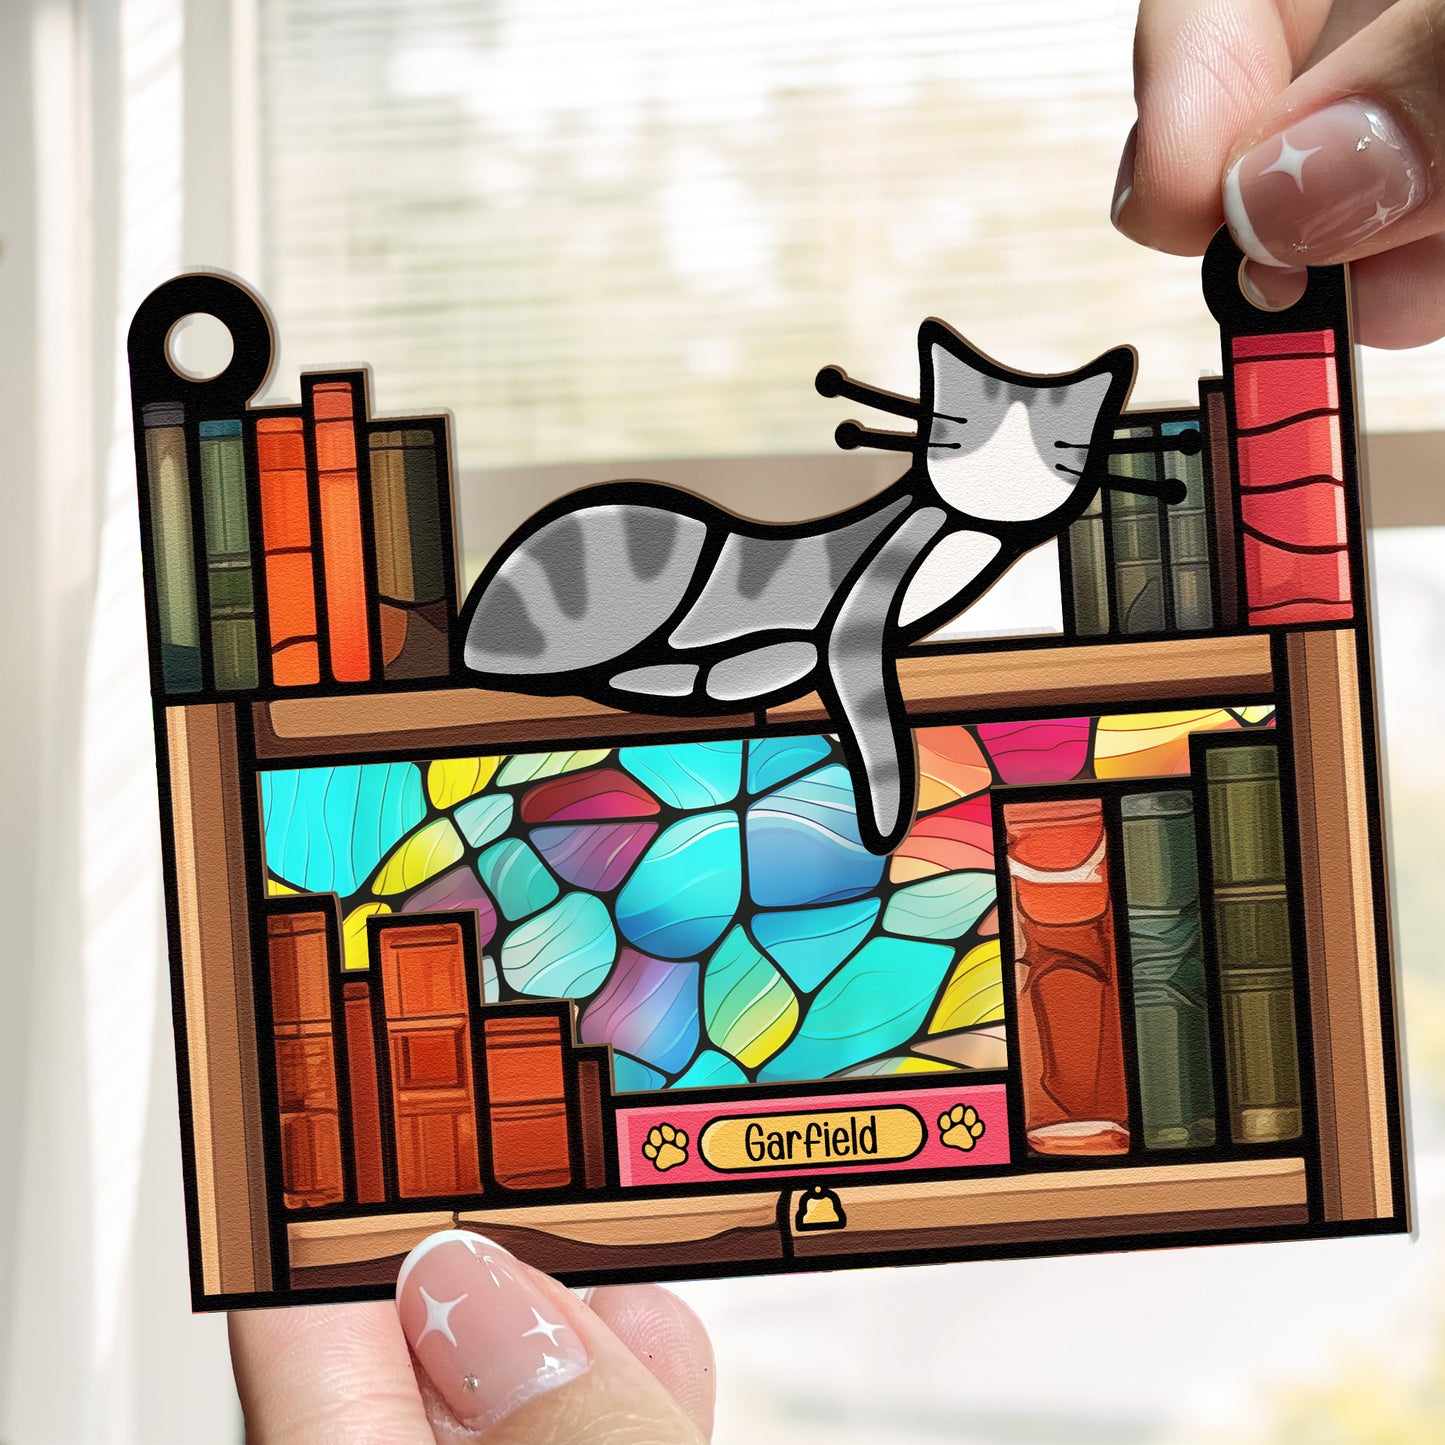 Pet Cats And Read Books - Personalized Window Hanging Suncatcher Ornament